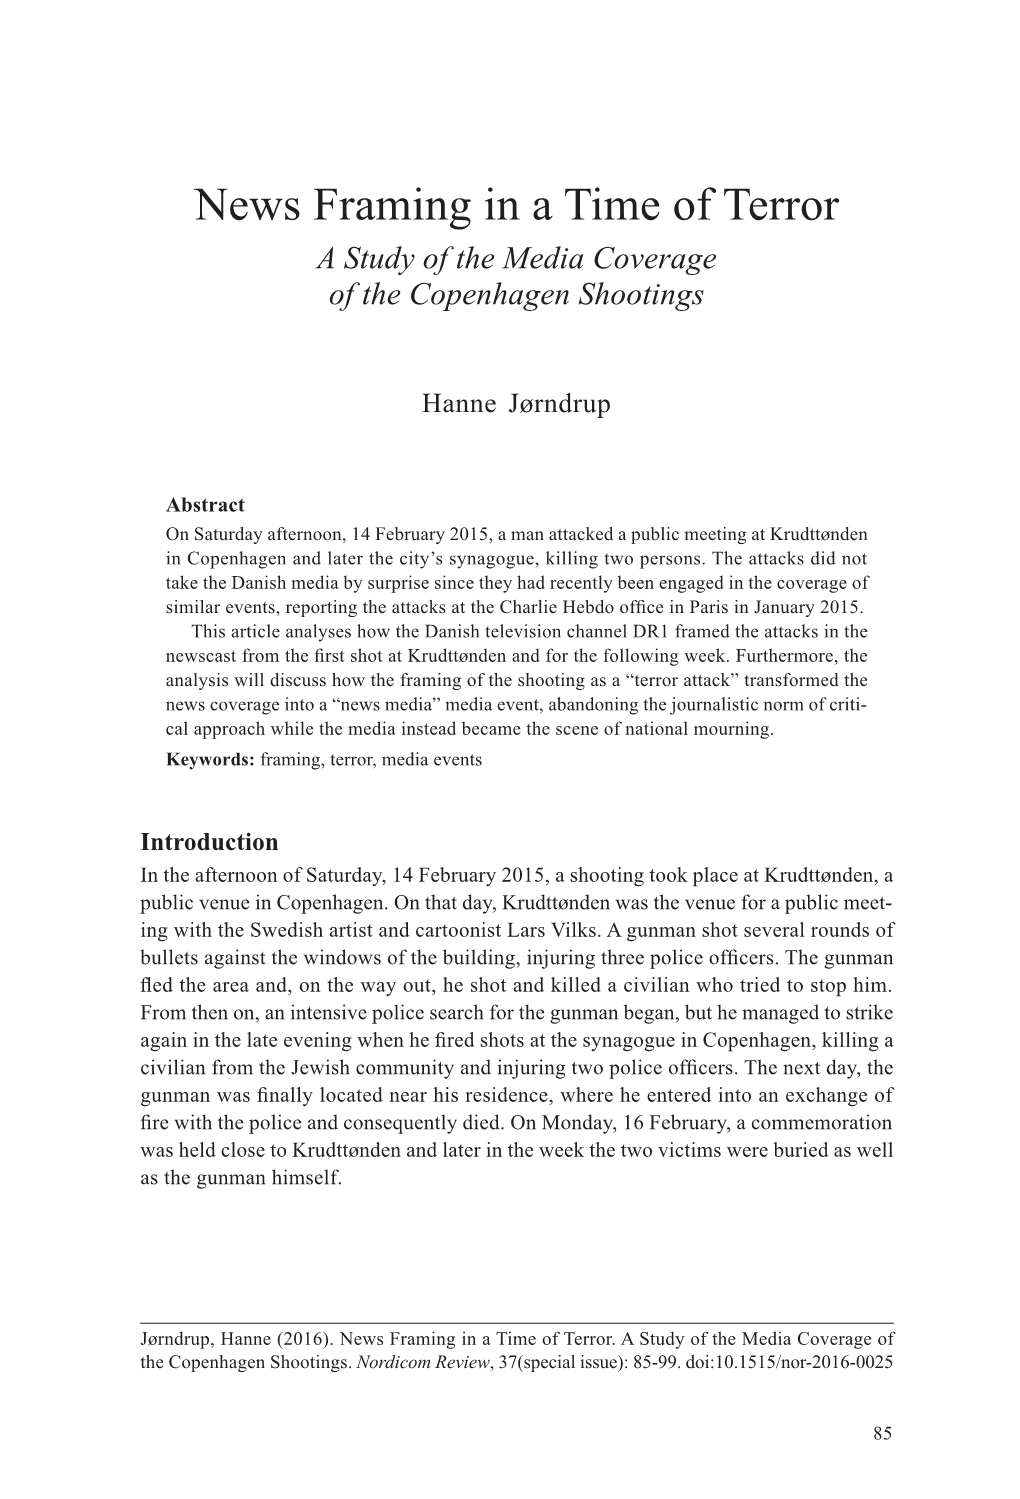 News Framing in a Time of Terror a Study of the Media Coverage of the Copenhagen Shootings